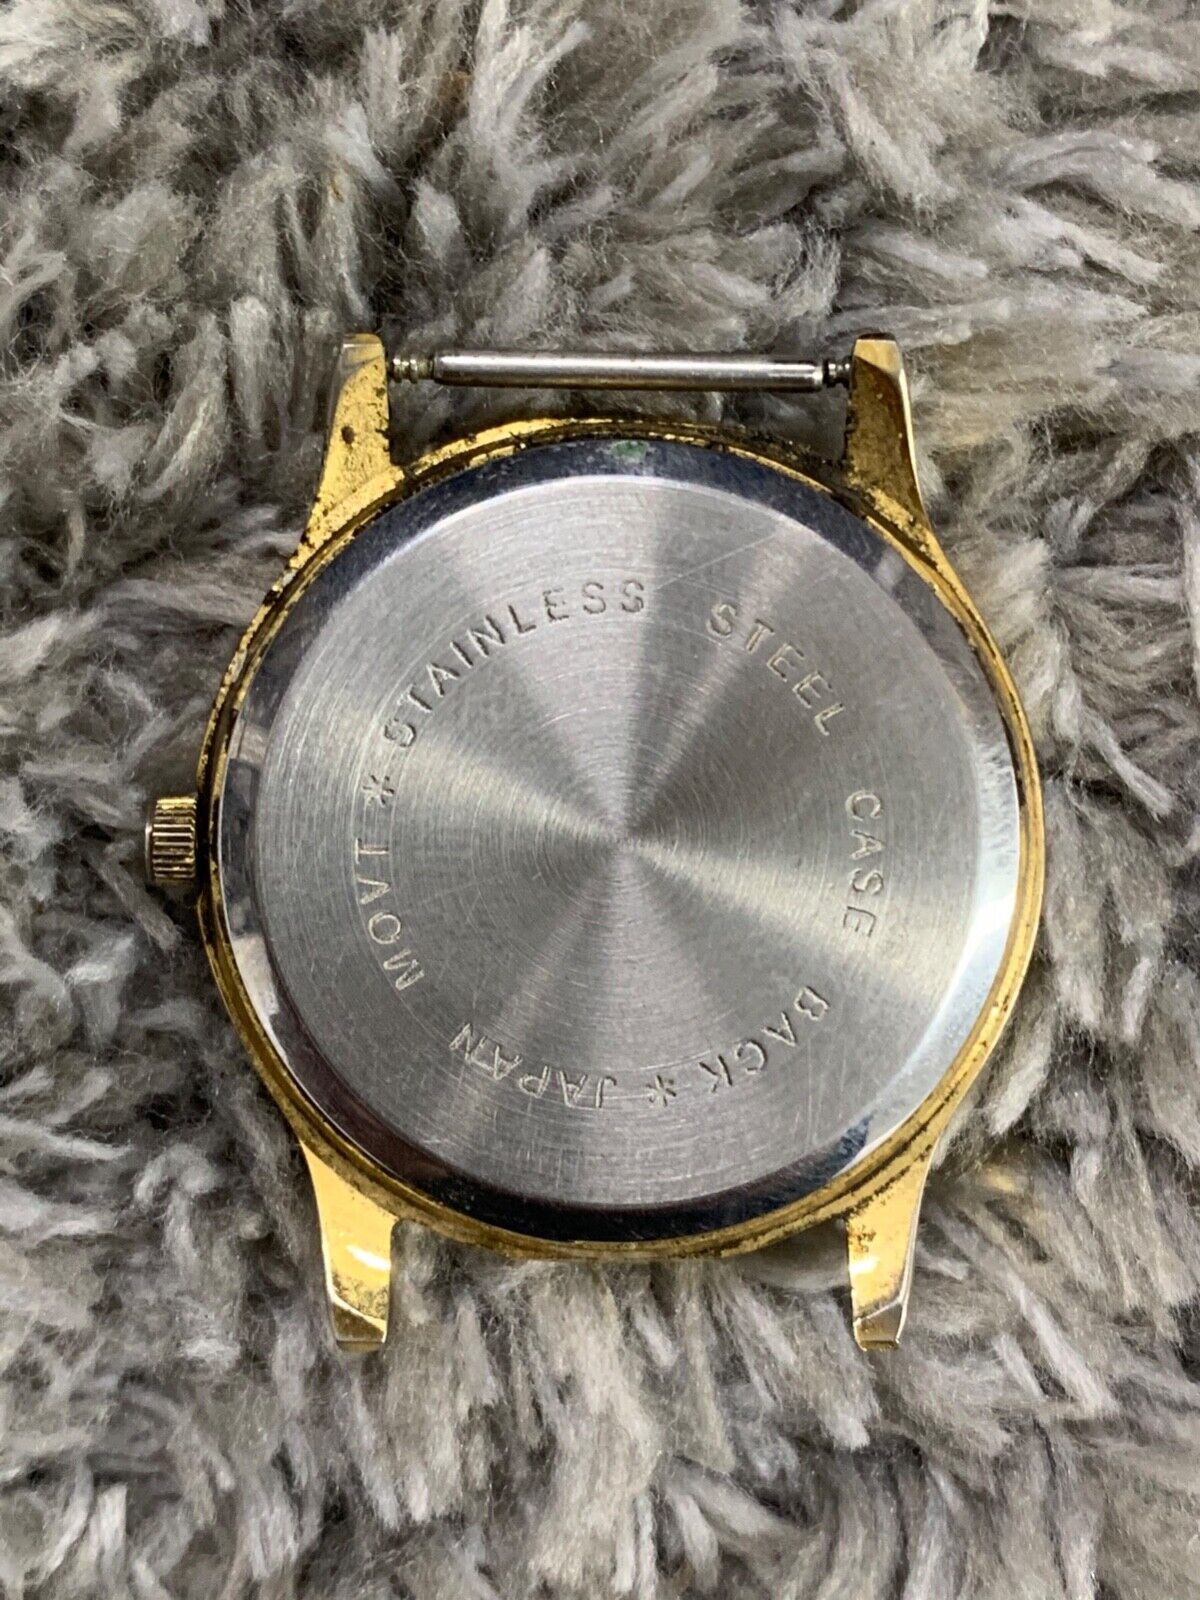 Time Watch Unisex Gold Tone Round Dial (Untested, No Band) | eBay